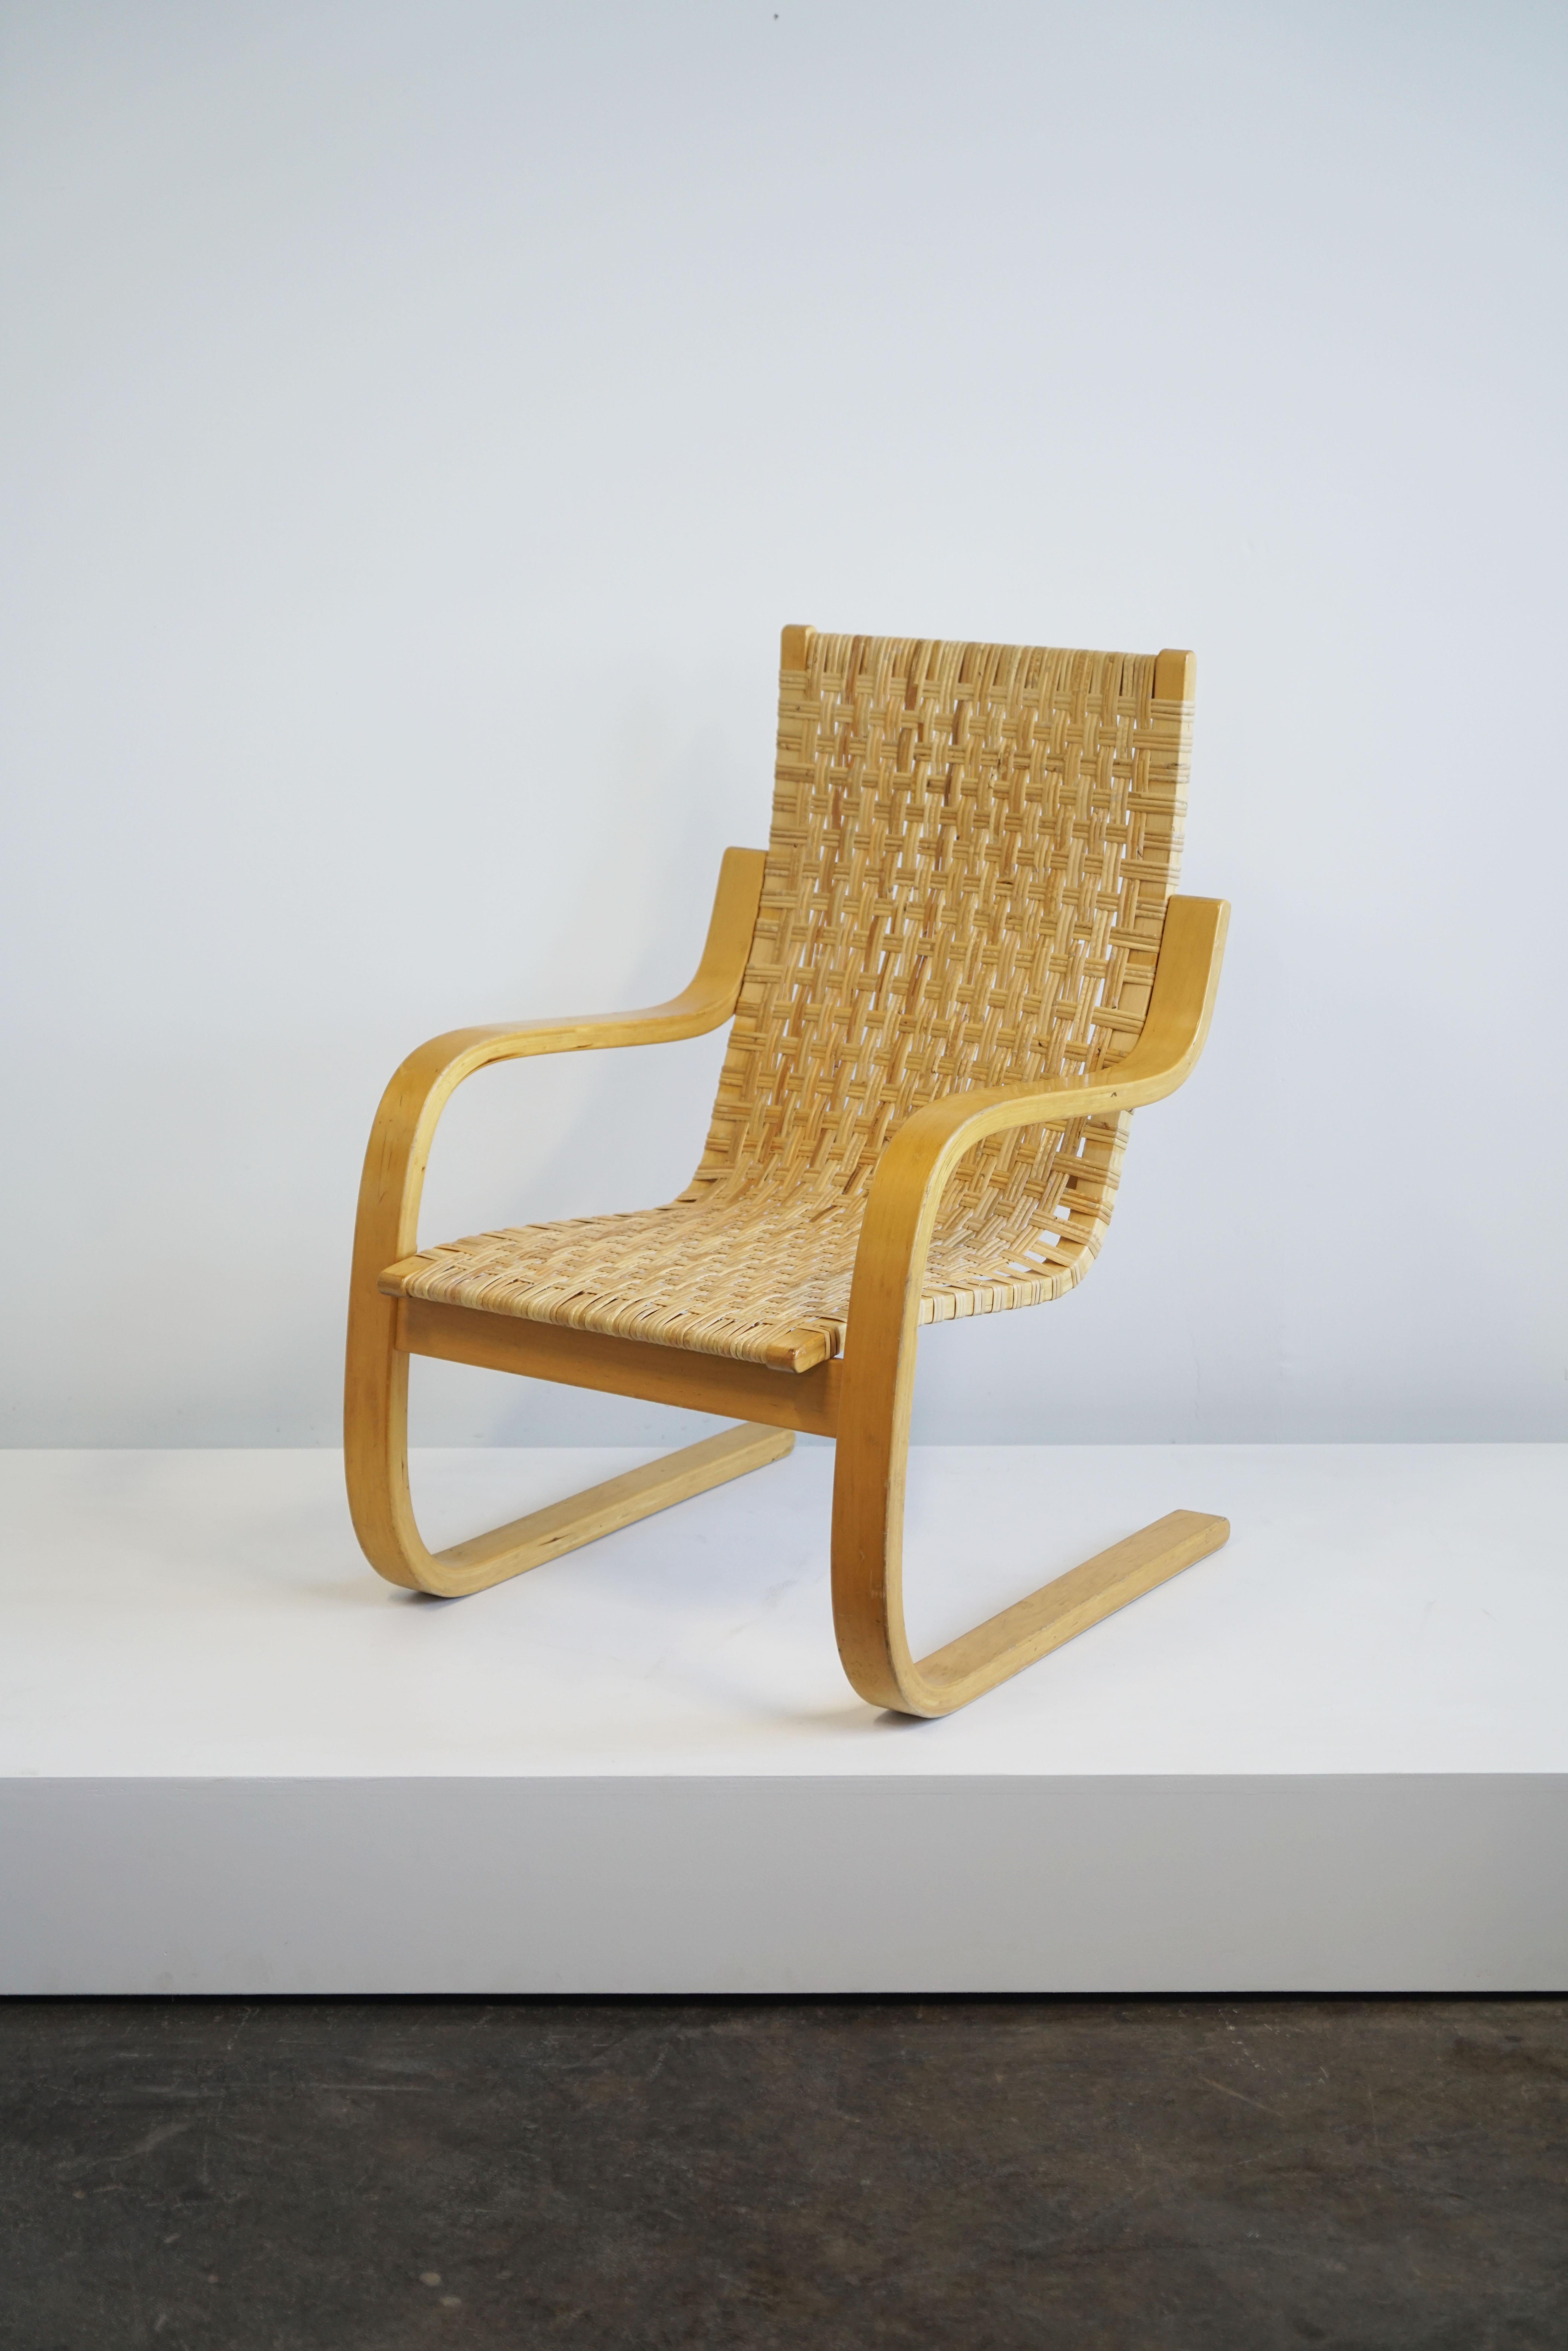 Alvar Aalto, cantilevered chair model 406. 
Laminated birch, cane.
circa 1960

The model 406 chair was originally designed in 1938-39. 
Measures: 35